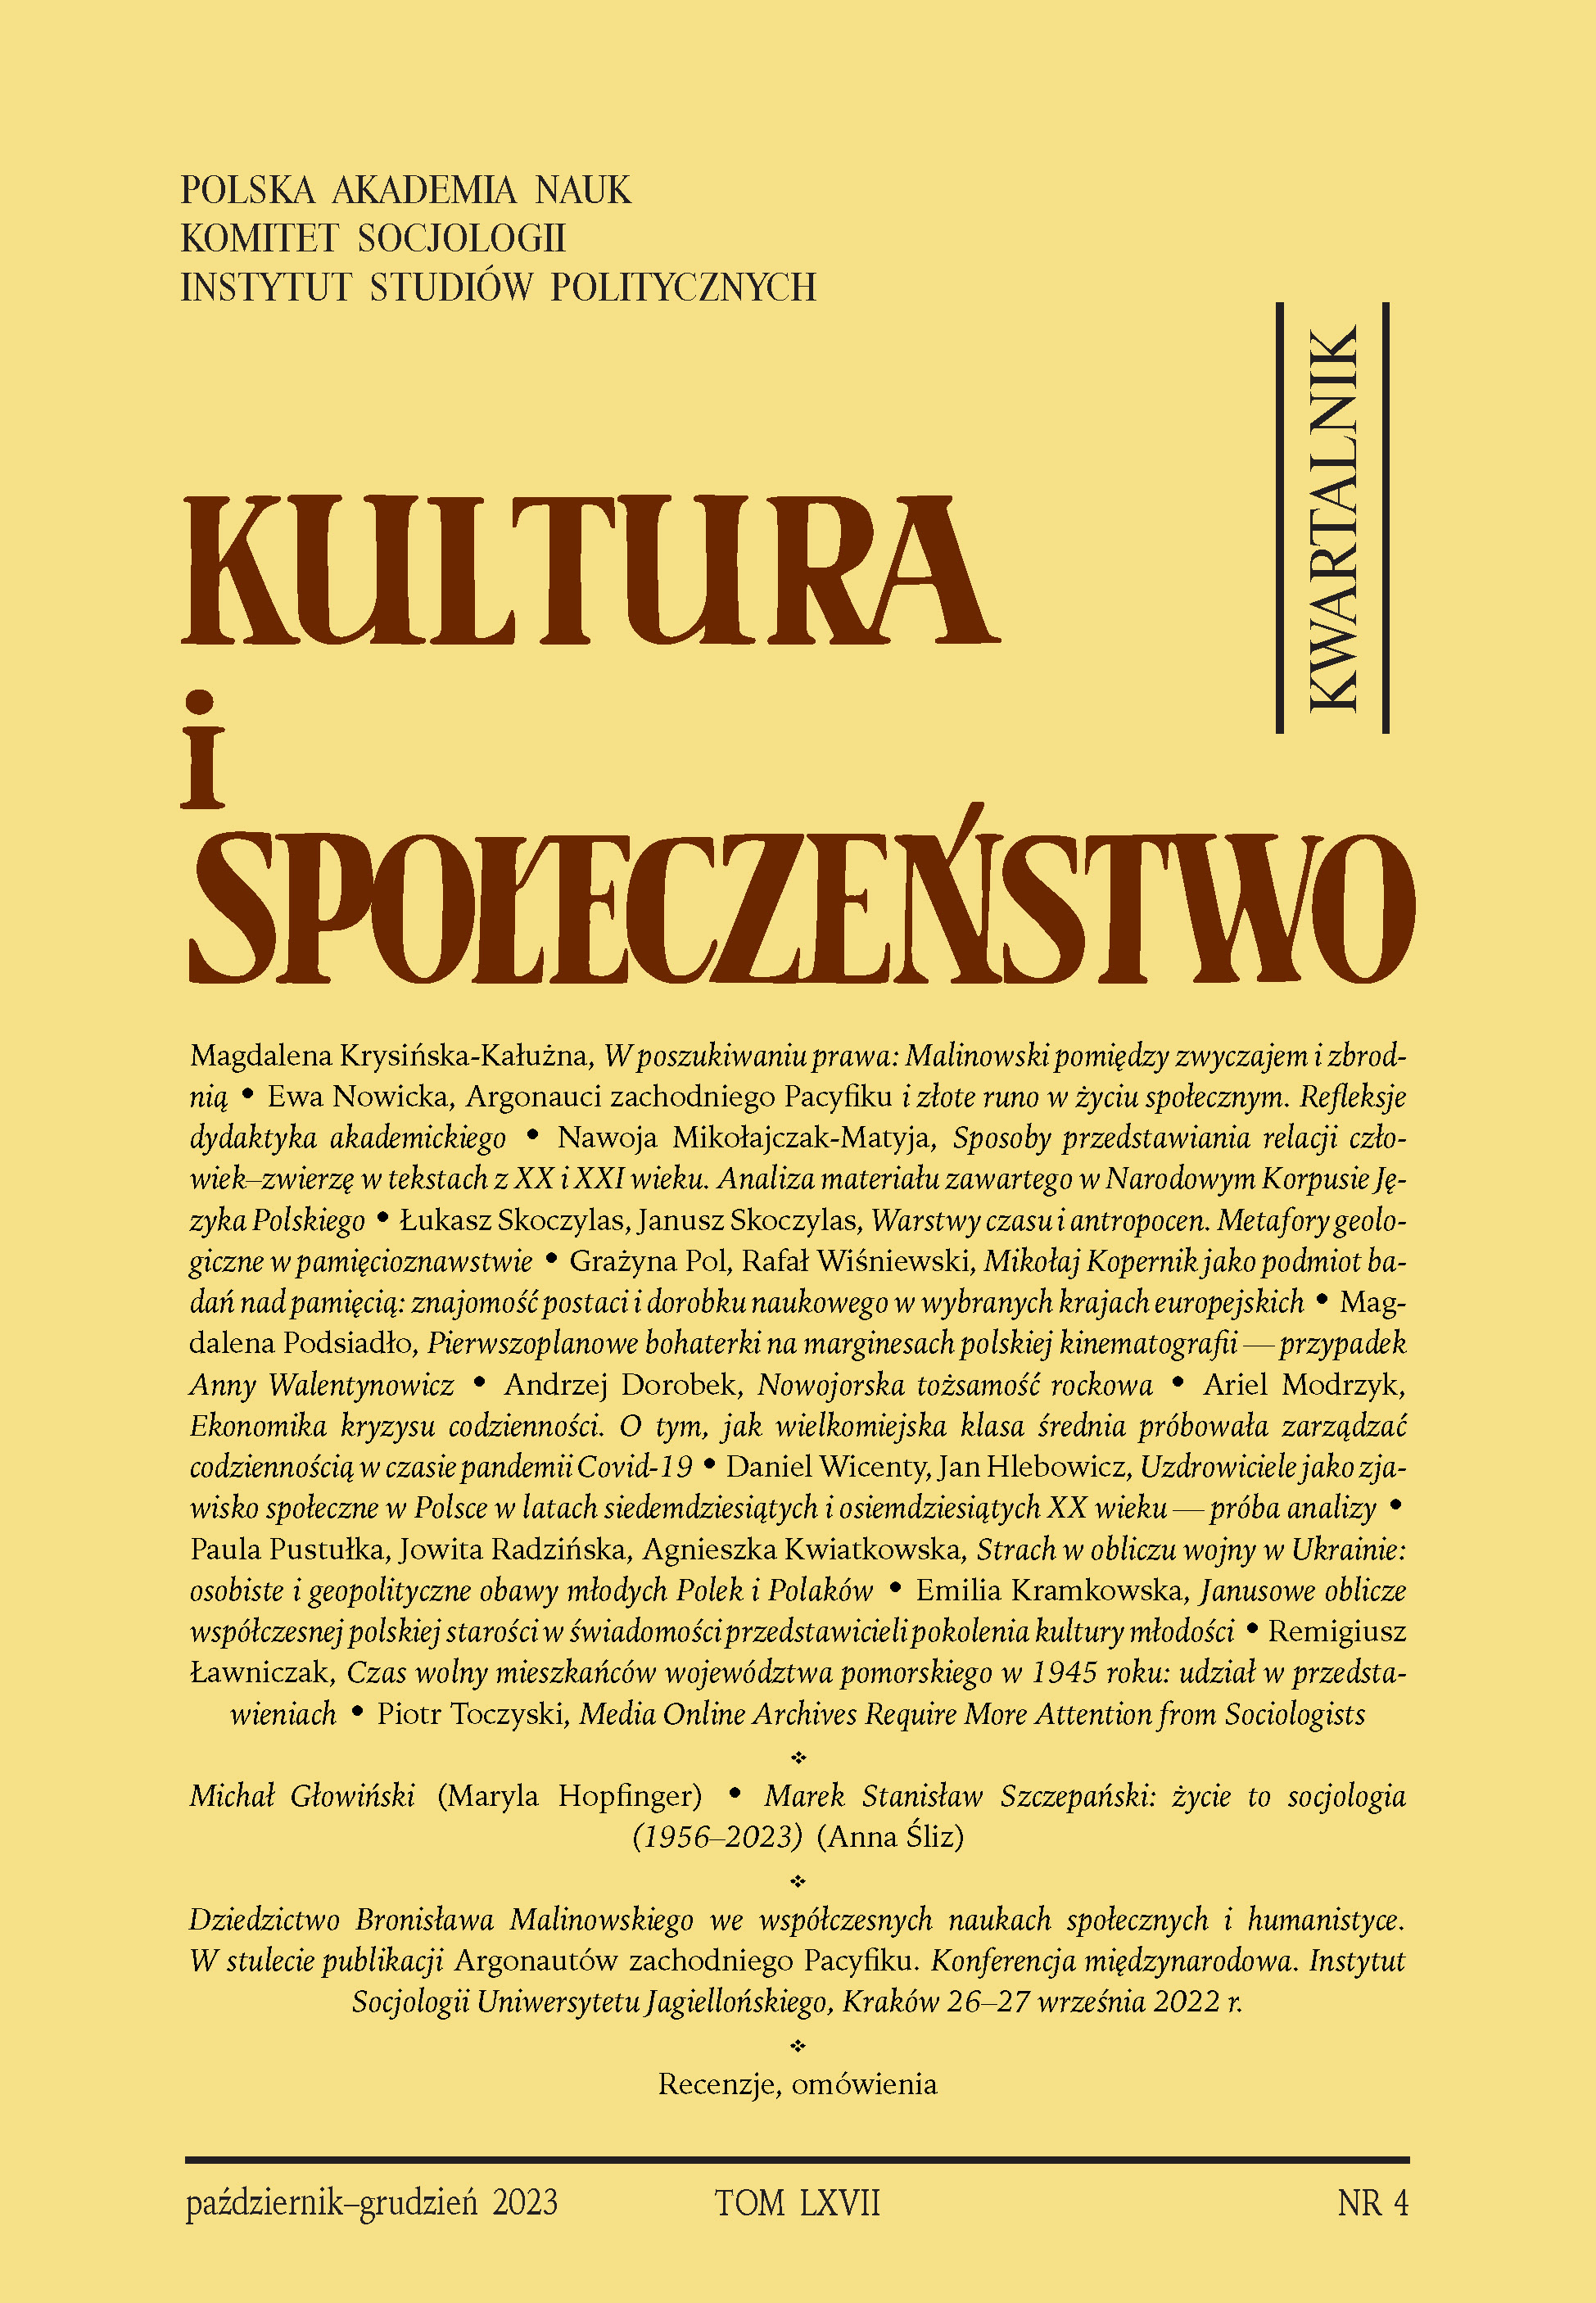 HEALERS AS A SOCIAL PHENOMENON IN POLAND IN THE NINETEEN-SEVENTIES AND EIGHTIES — AN EXPLORATORY ANALYSIS Cover Image